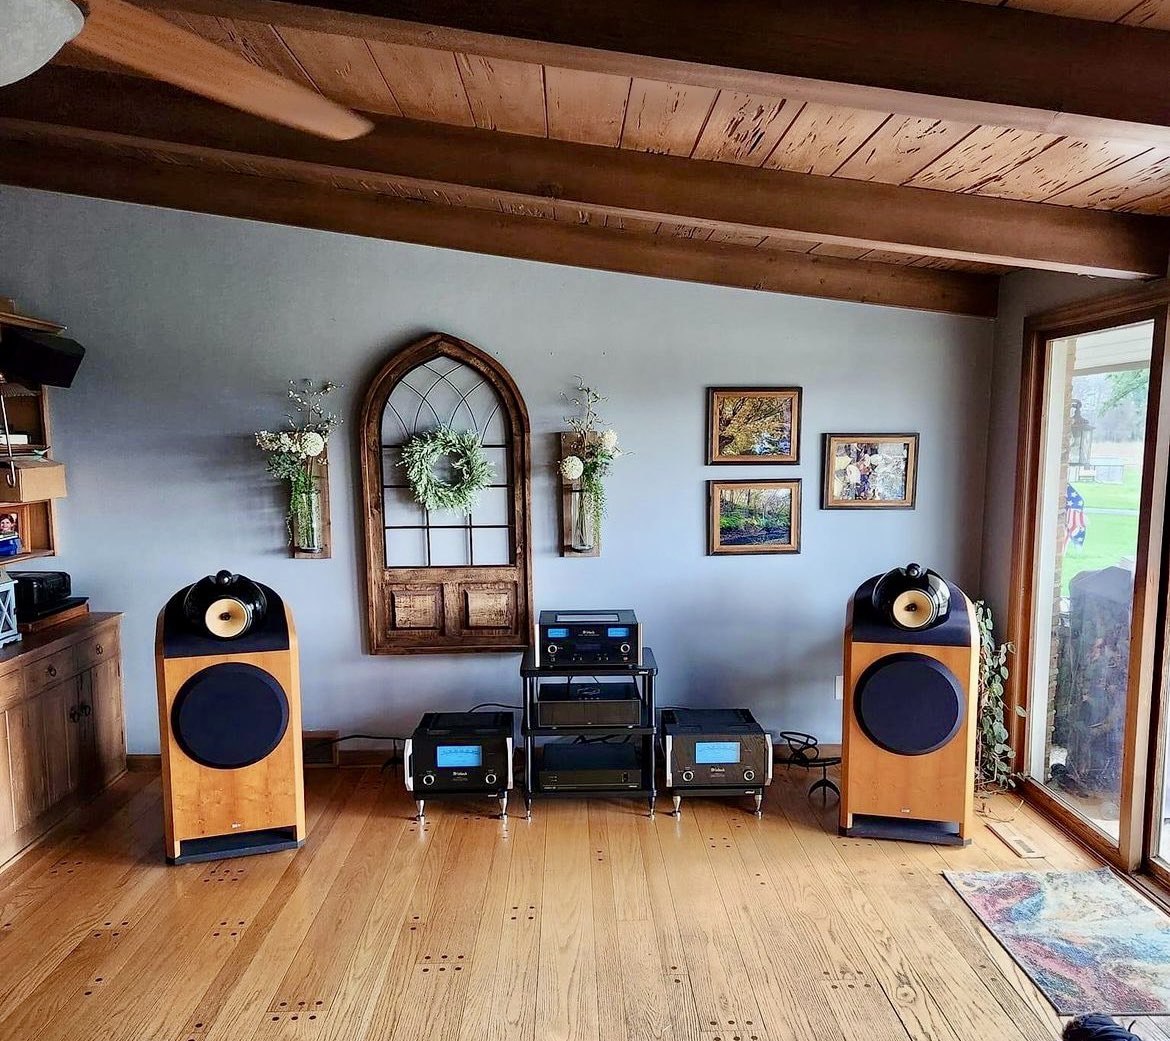 Wonderful personal audio space with #solidsteel supports to sustain great audio components. 
S3-3 as central rack and HY Series amp stands.
Thanks Seattle Hi-Fi for sharing.
#hifi #hifirack #audiophile #highfidelity #highendaudio